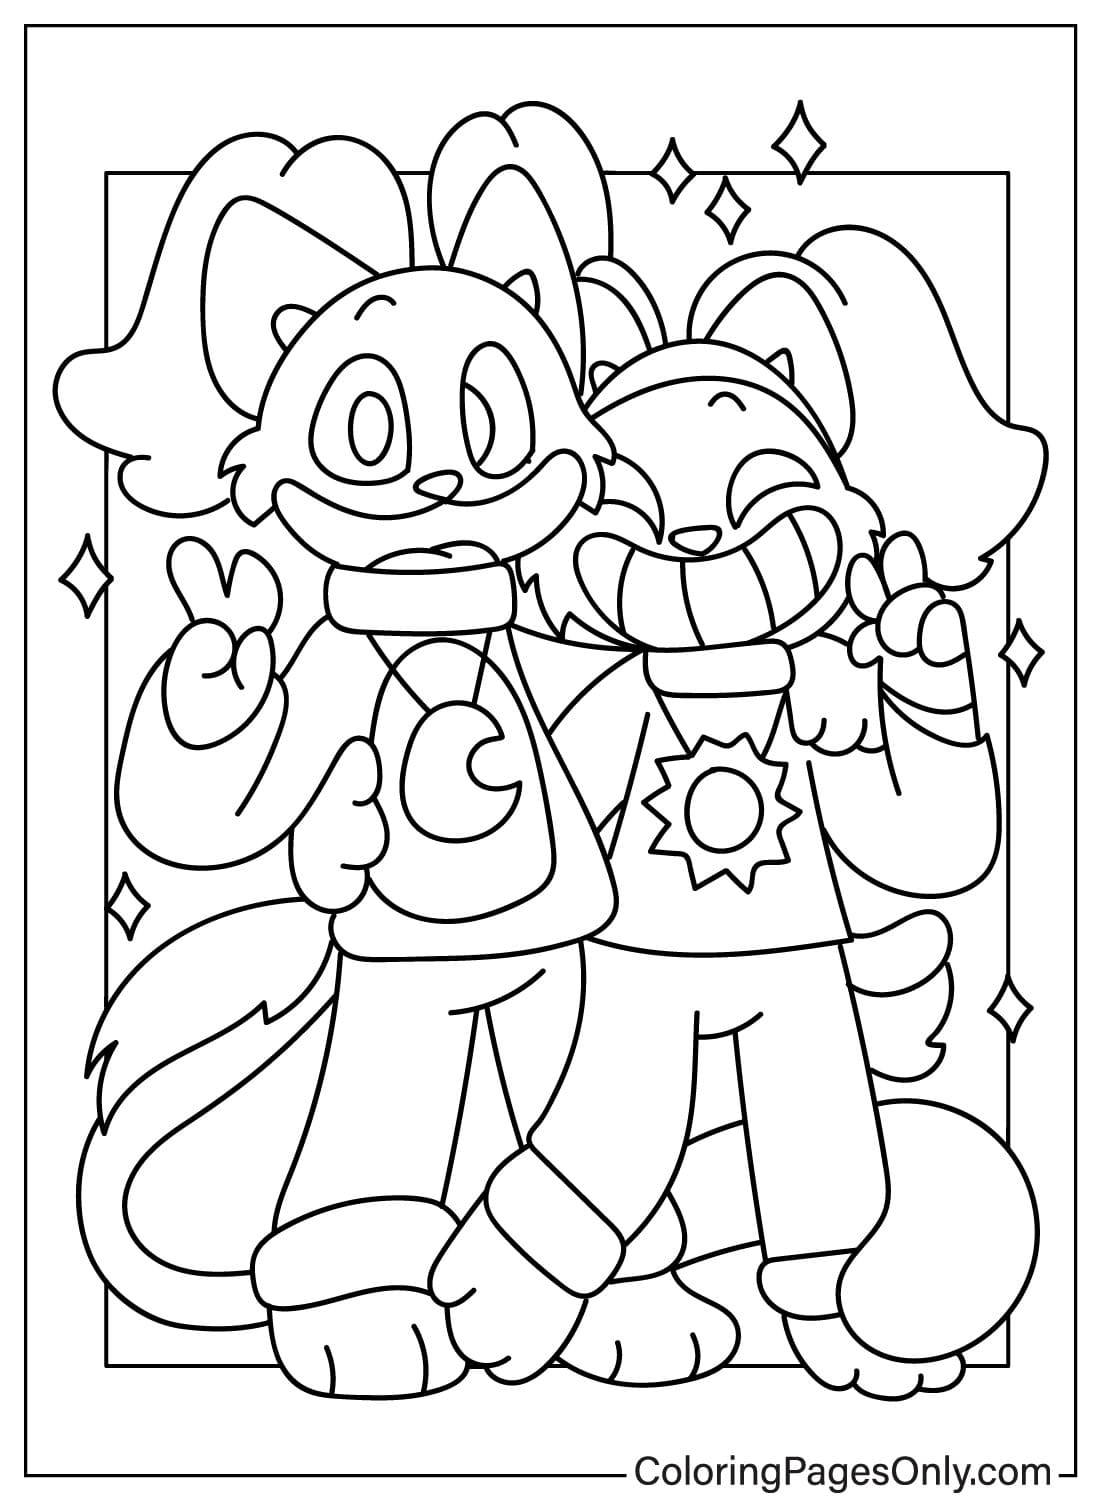 DogDay and CatNap Coloring Page Free from CatNap